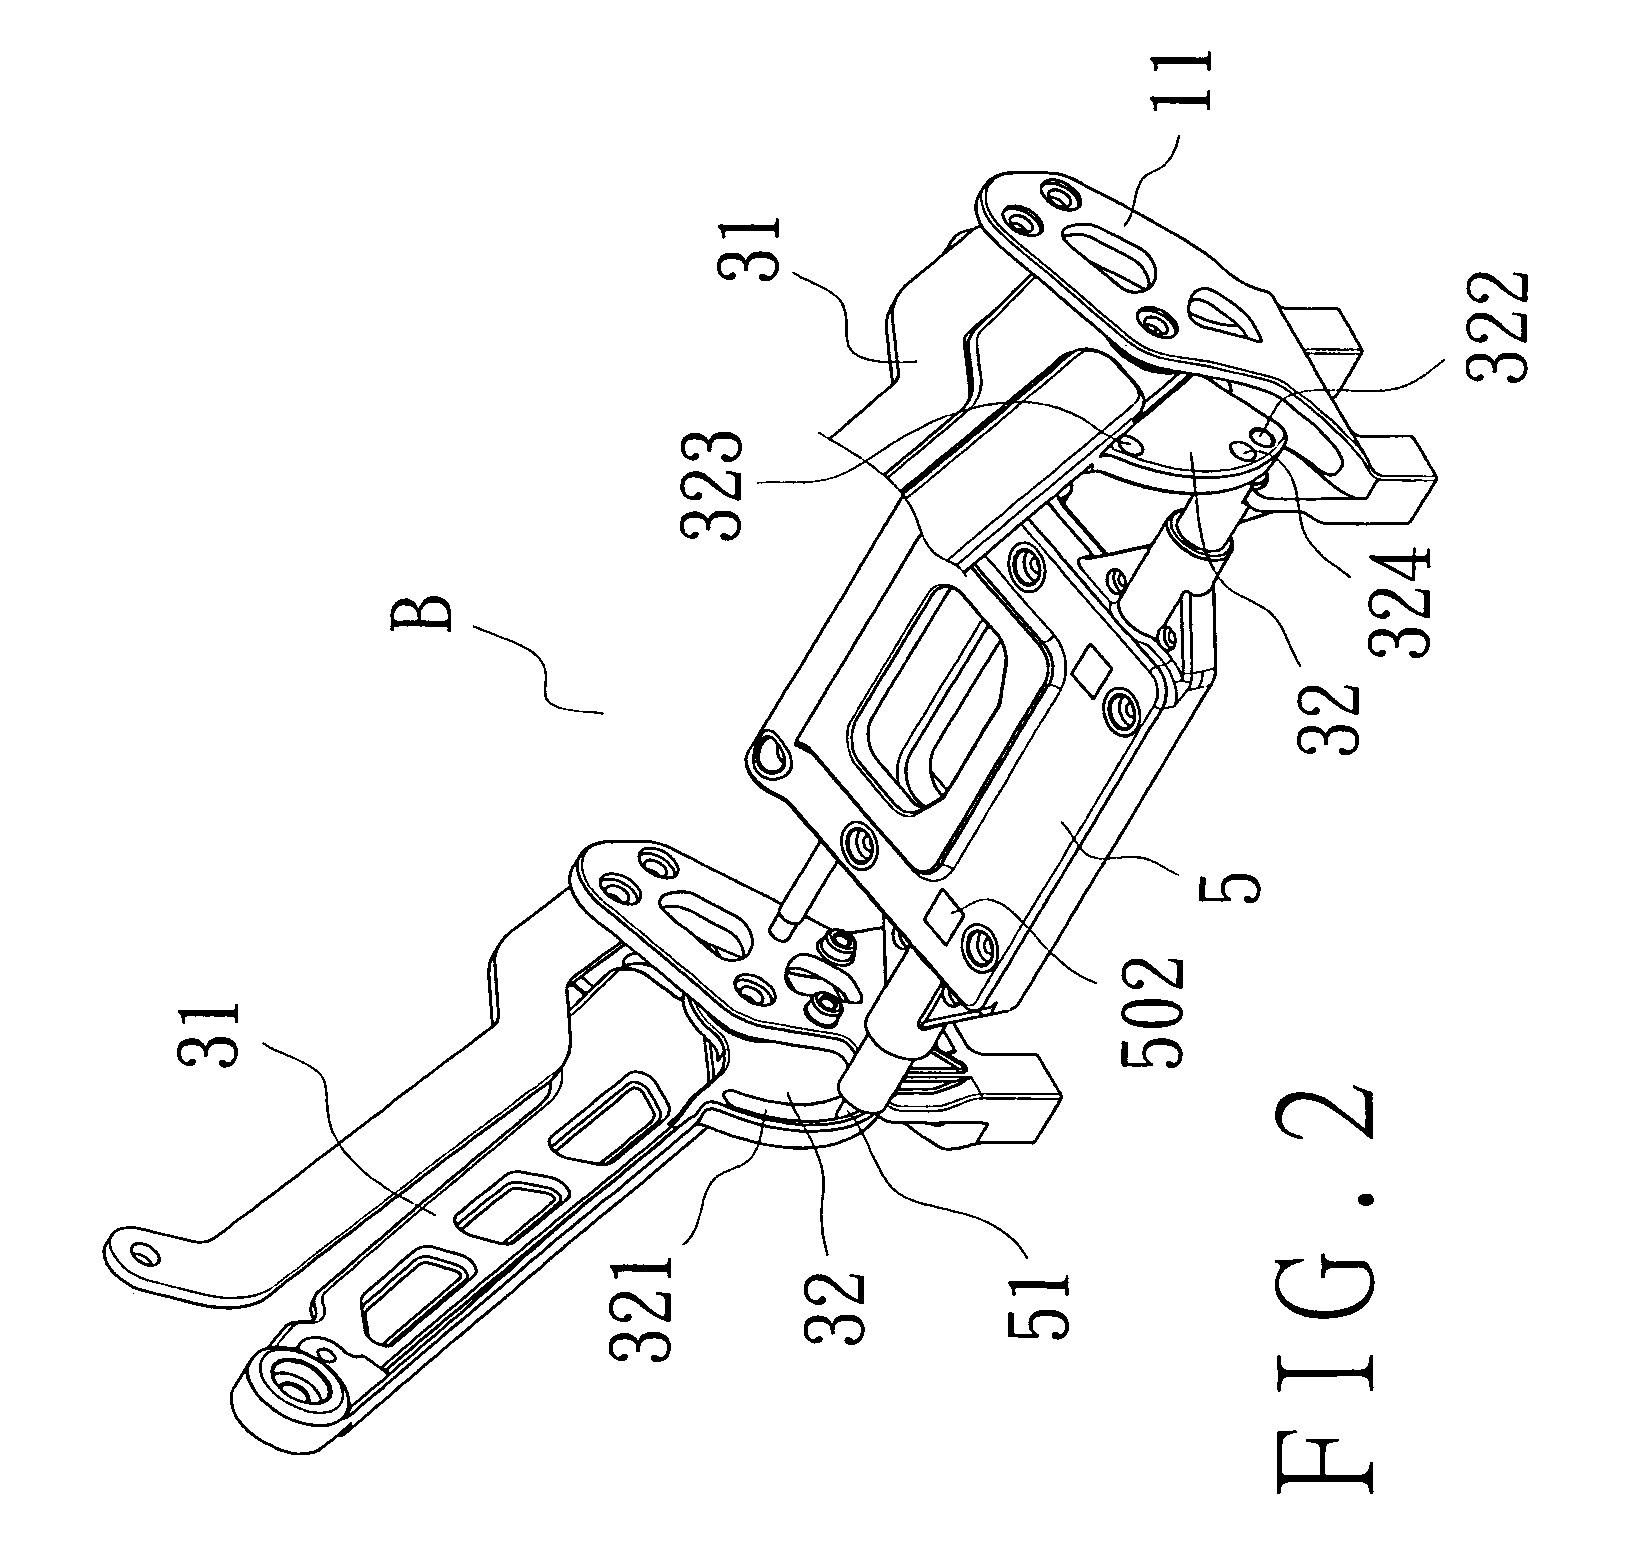 Folding and fixing device for a seat of an electric walk-substituting vehicle